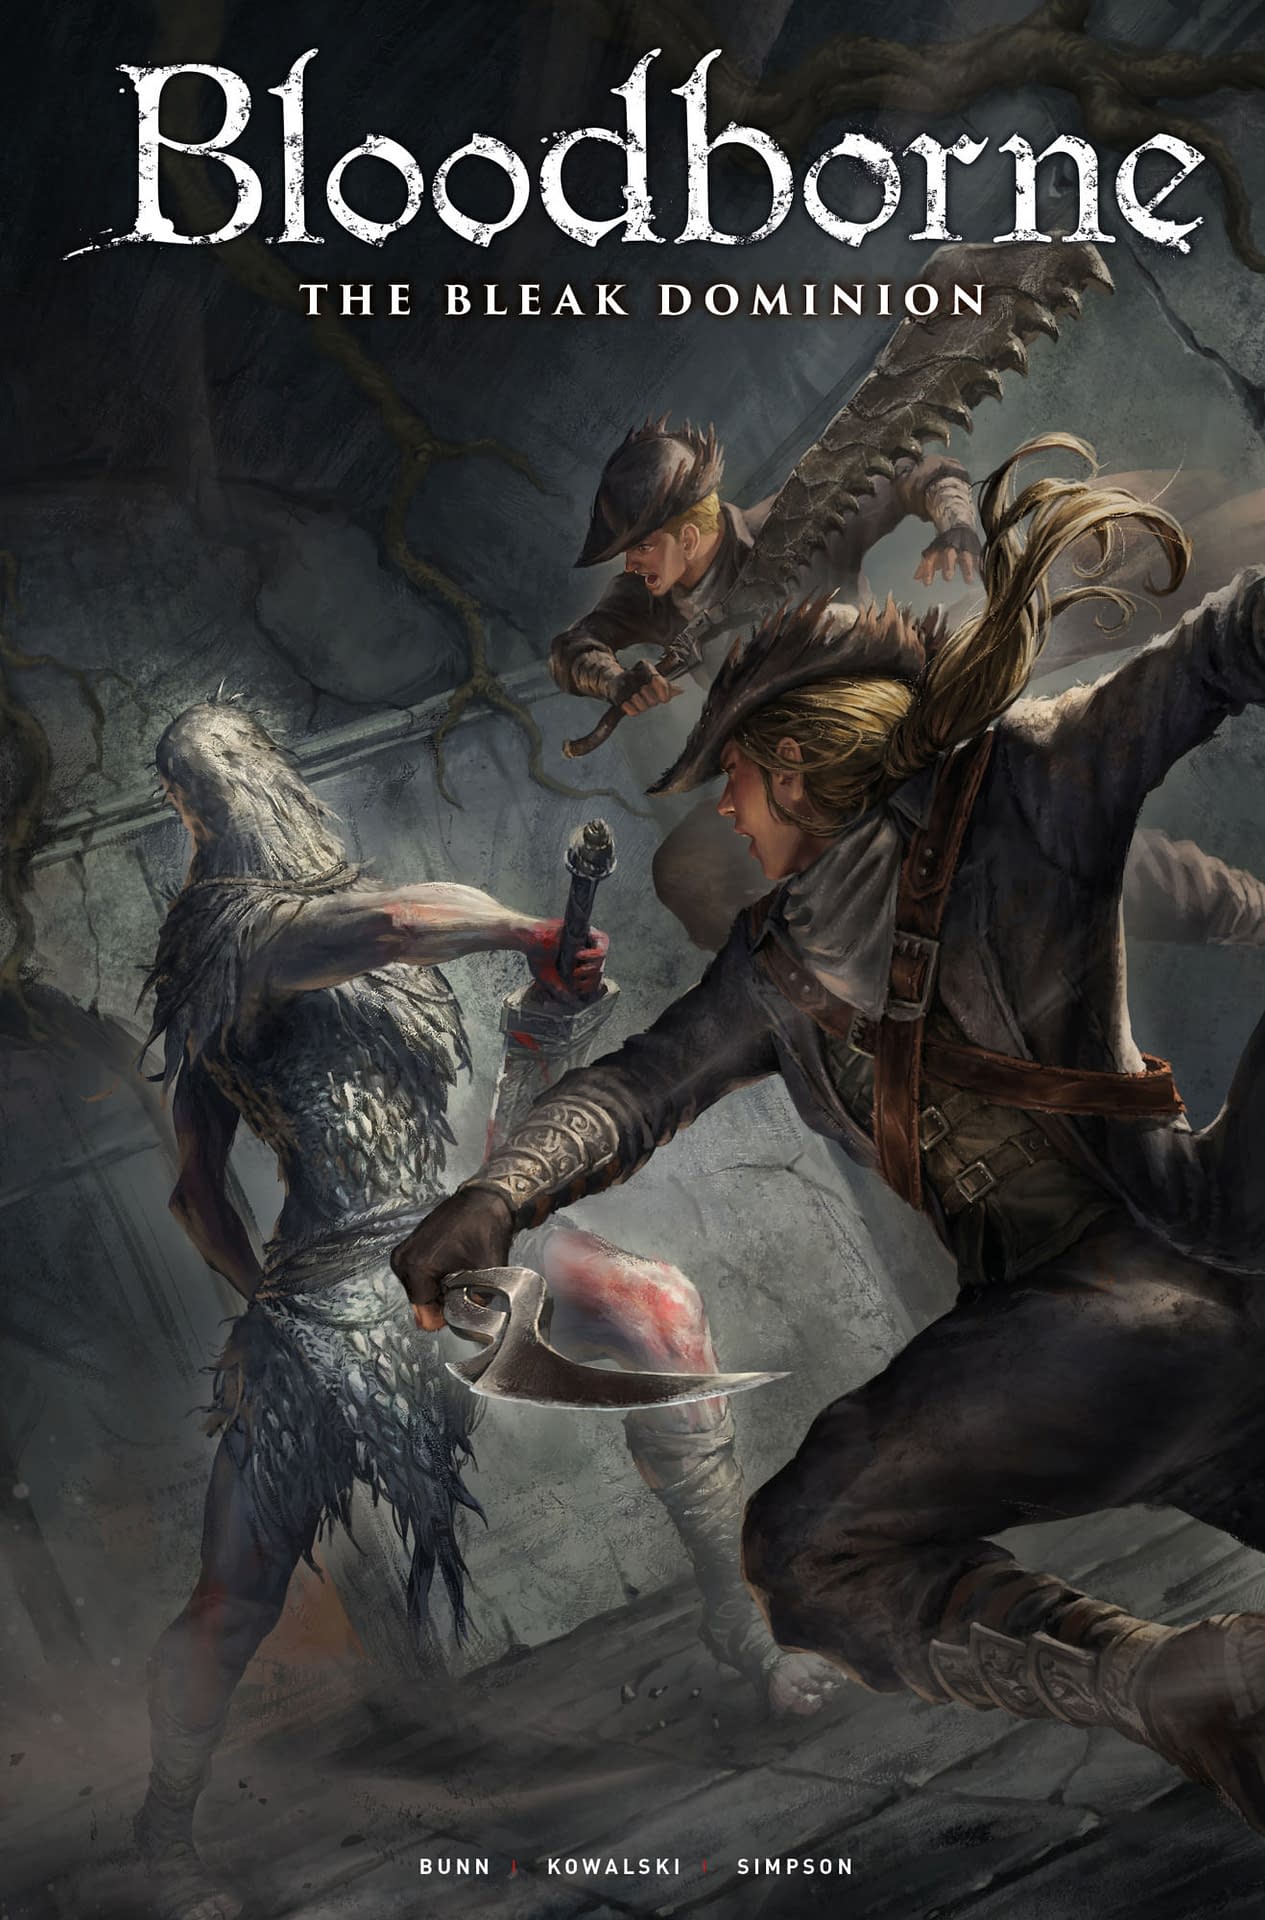 Bloodborne is coming to PCkinda 